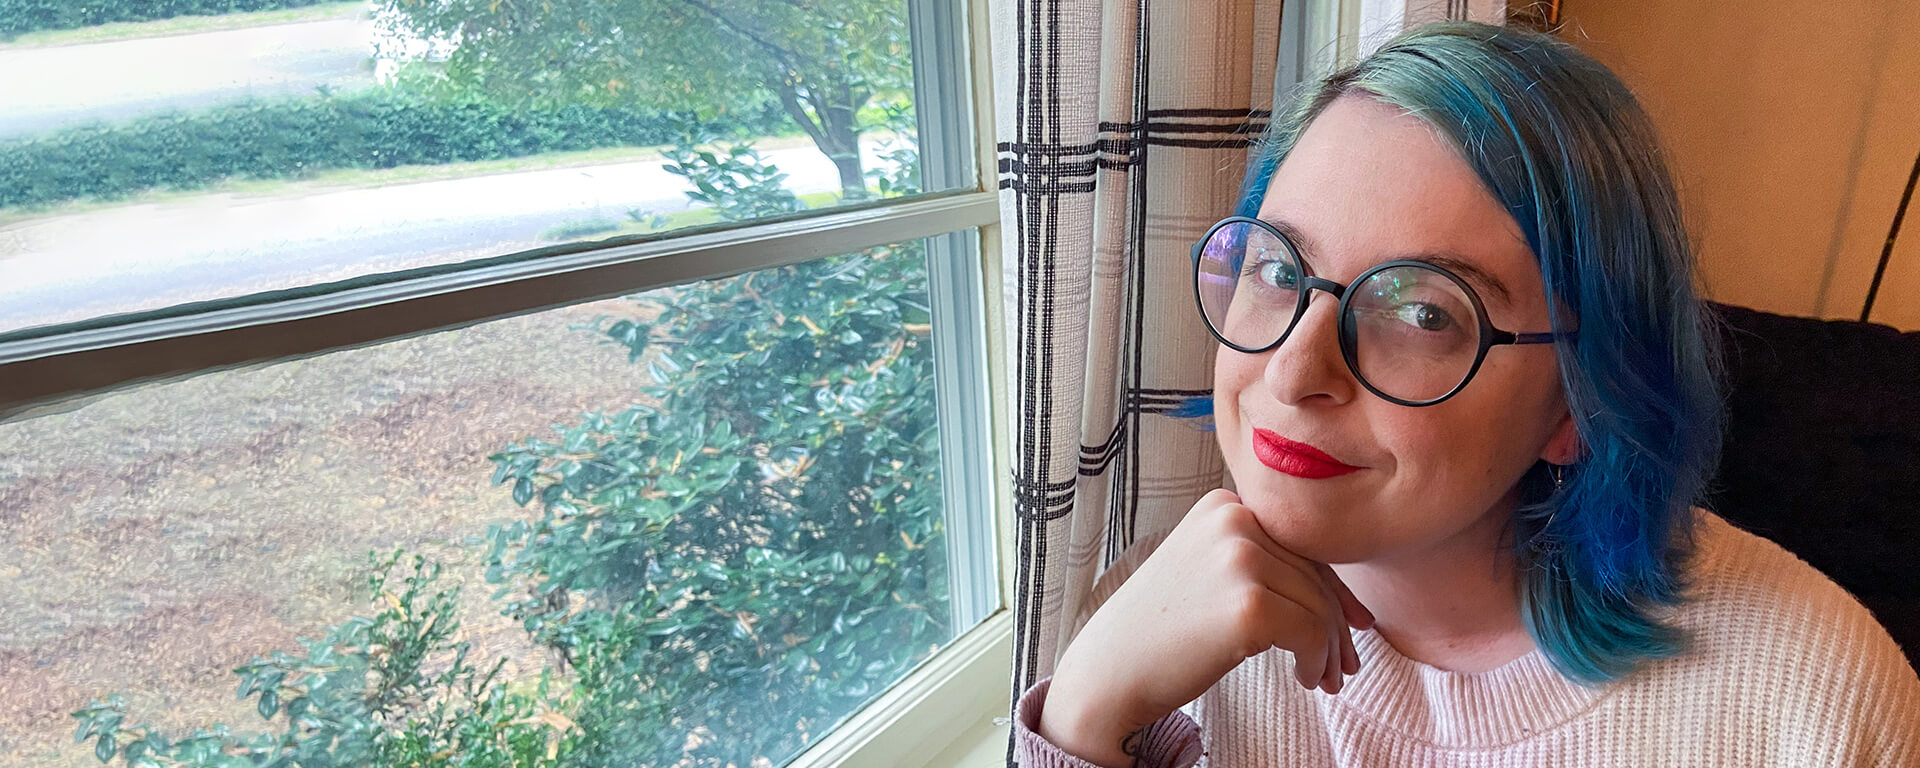 Capital One associate working remotely poses by her window